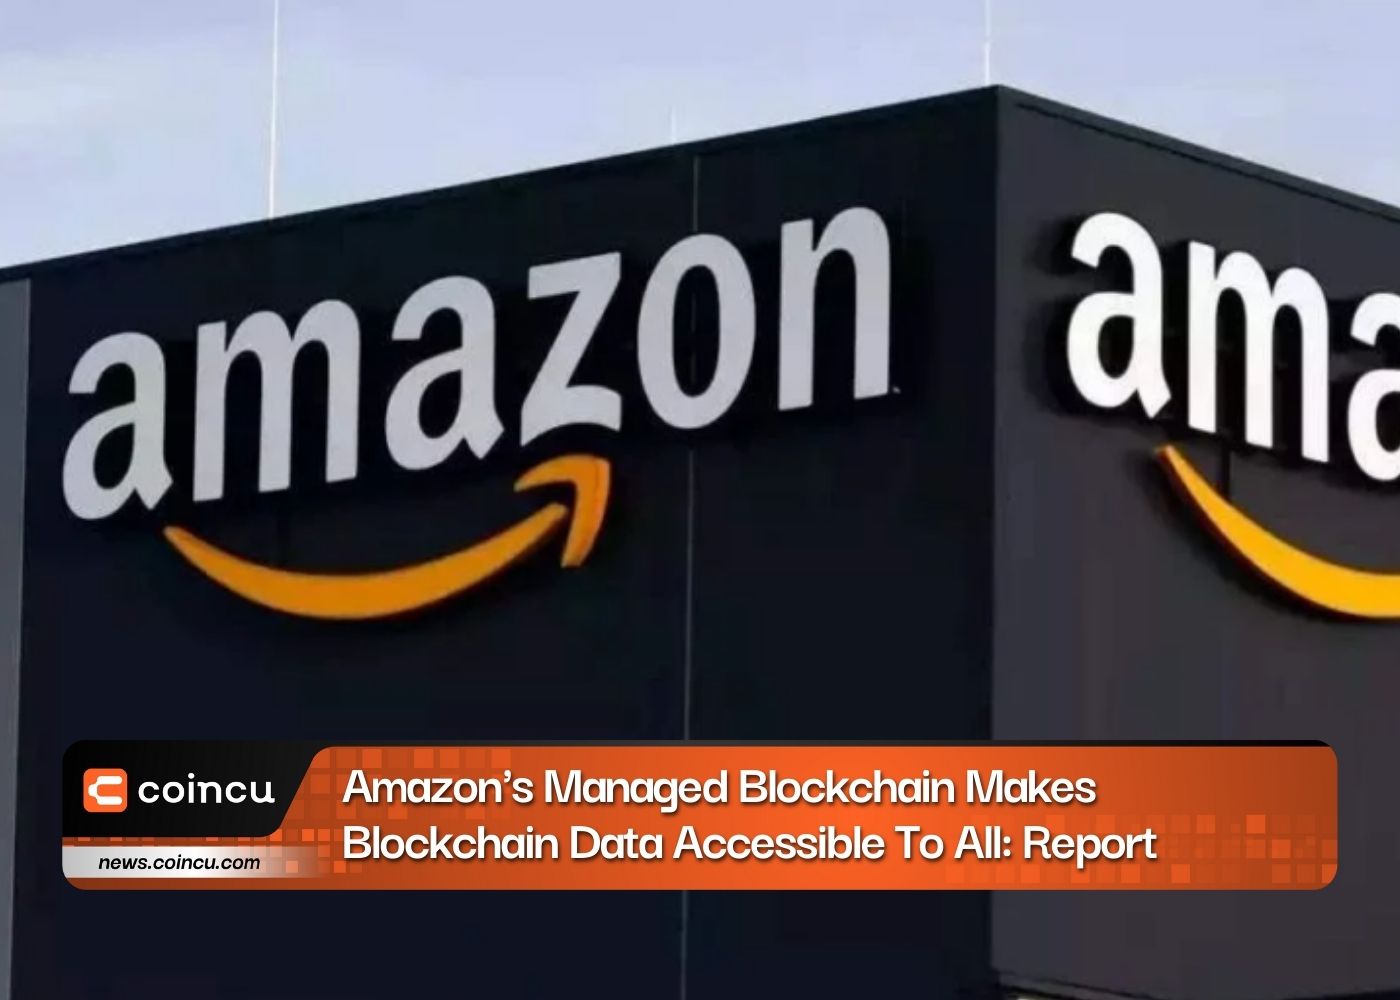 Amazon's Managed Blockchain Makes Blockchain Data Accessible To All: Report